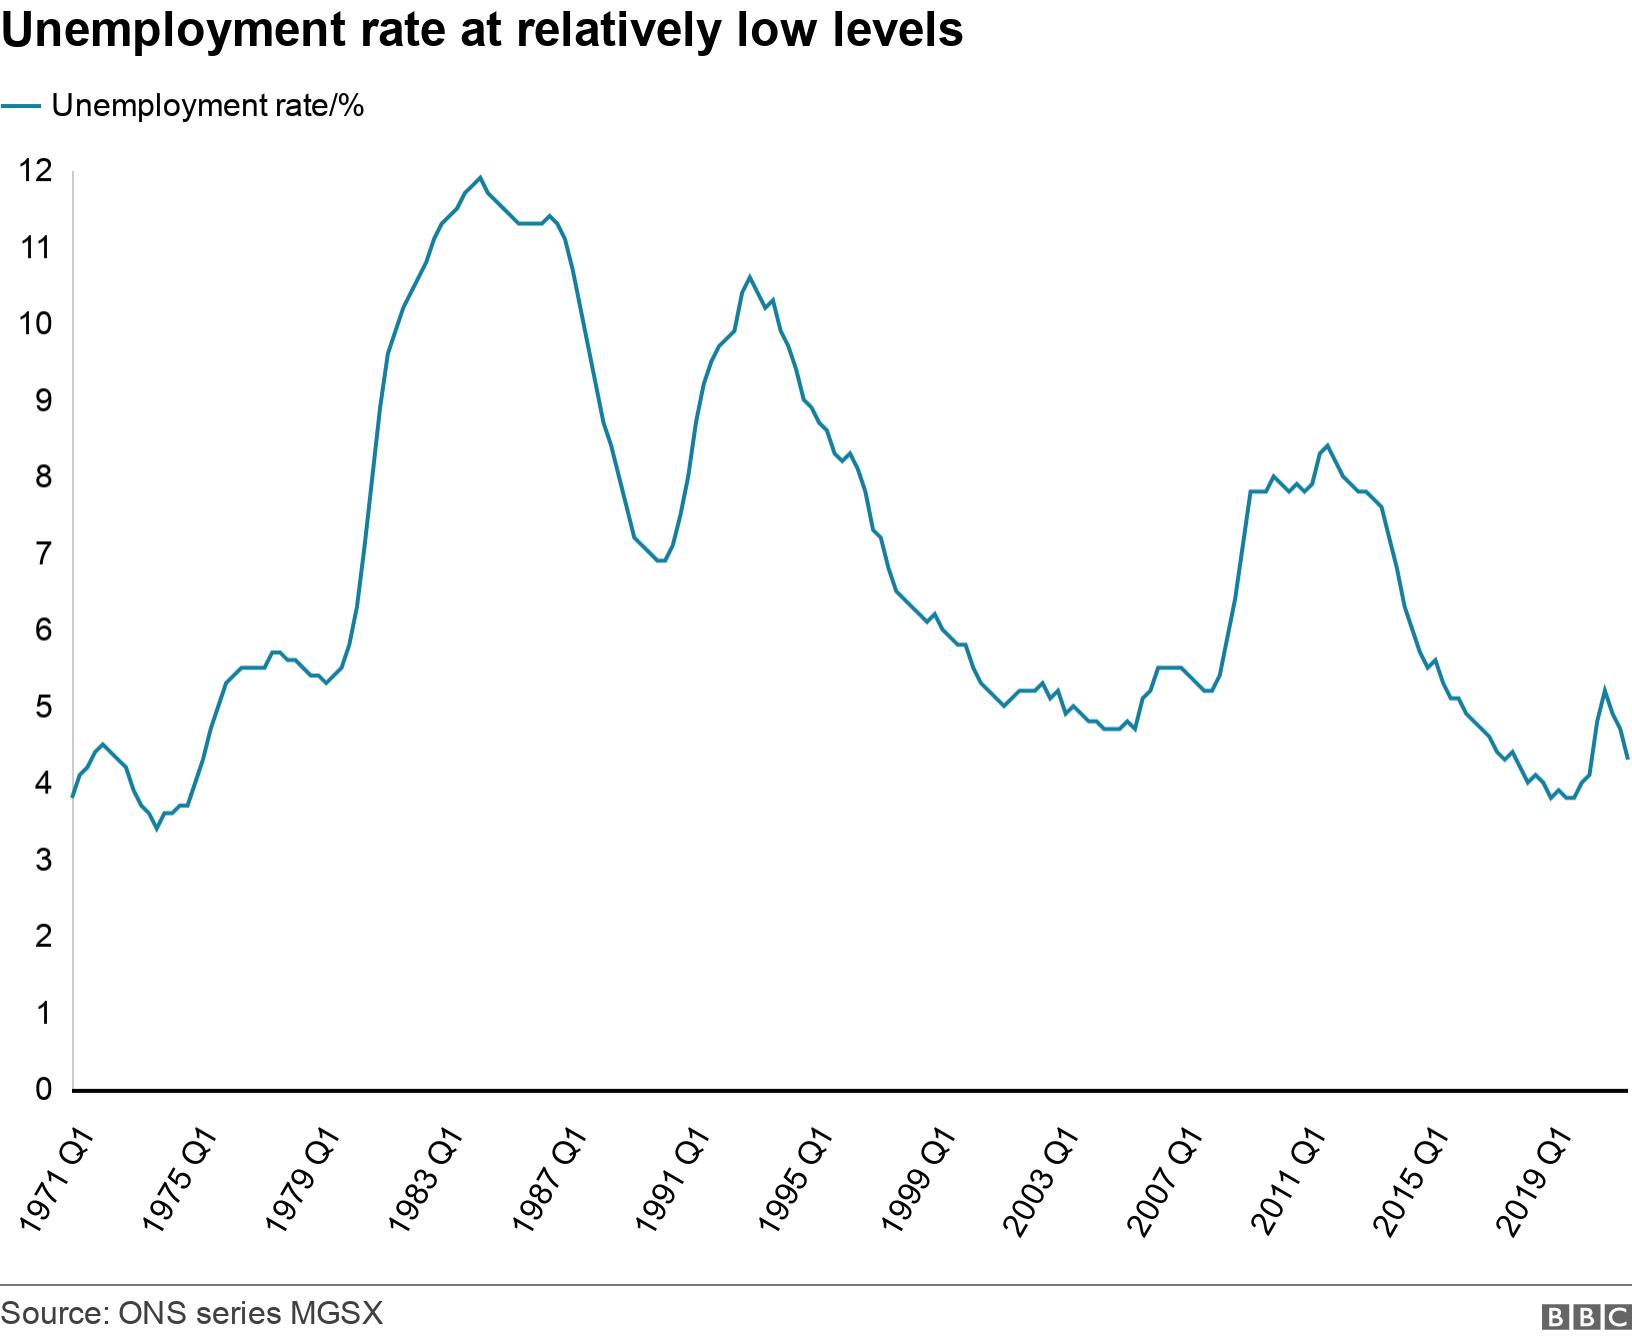 The unemployment rate is relatively low.  .  .